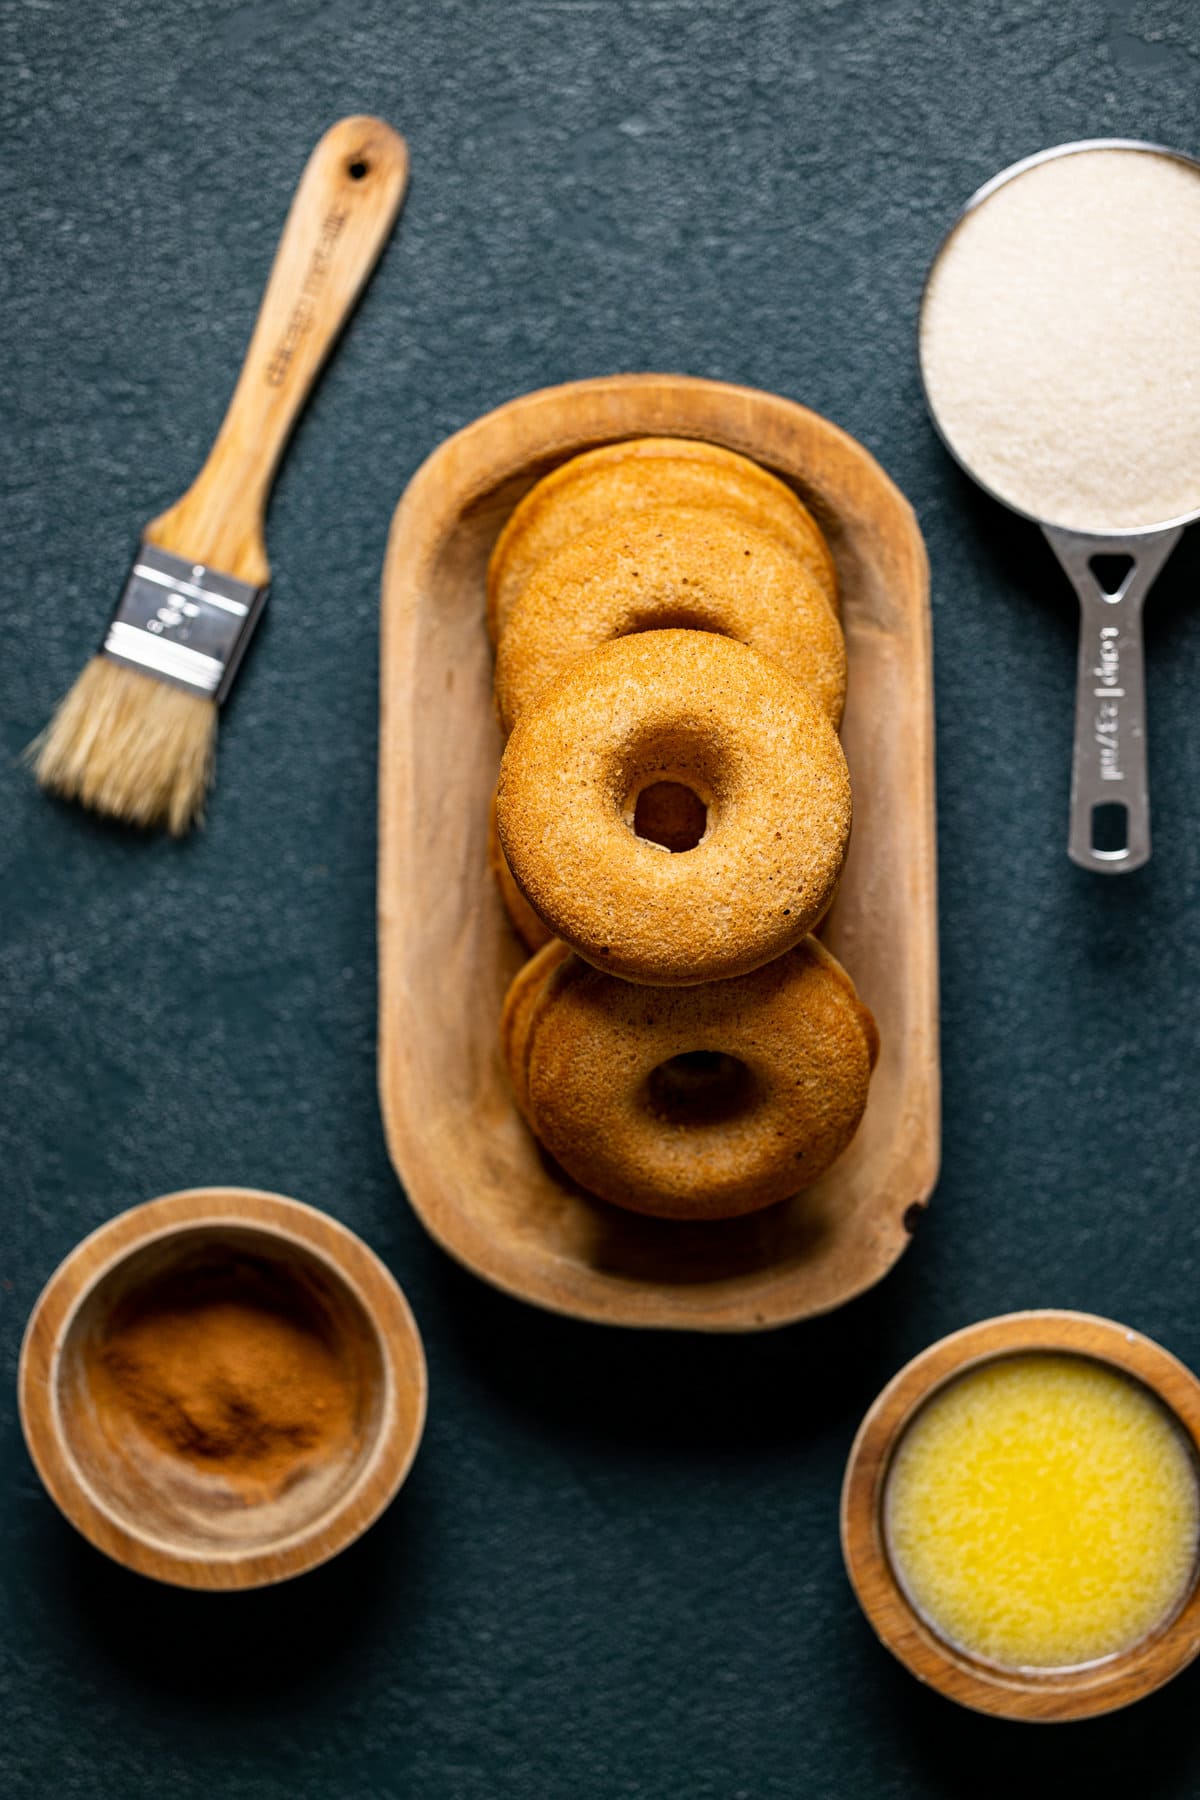 Un-coated Baked Vegan Apple Cider Donuts next to ingredients for the sugar coating